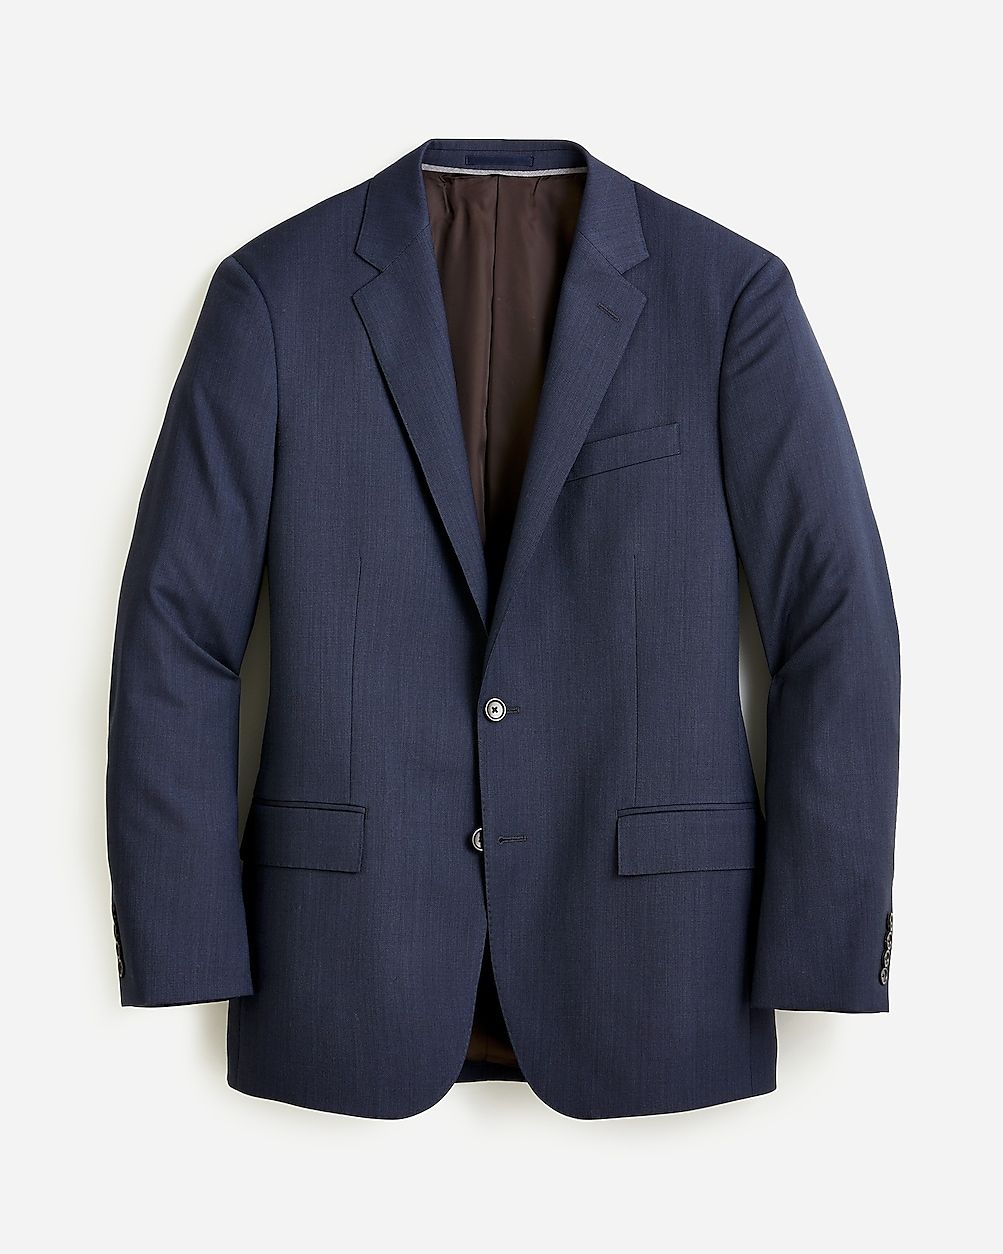 Ludlow Slim-fit suit jacket in Italian stretch worsted wool | J.Crew US